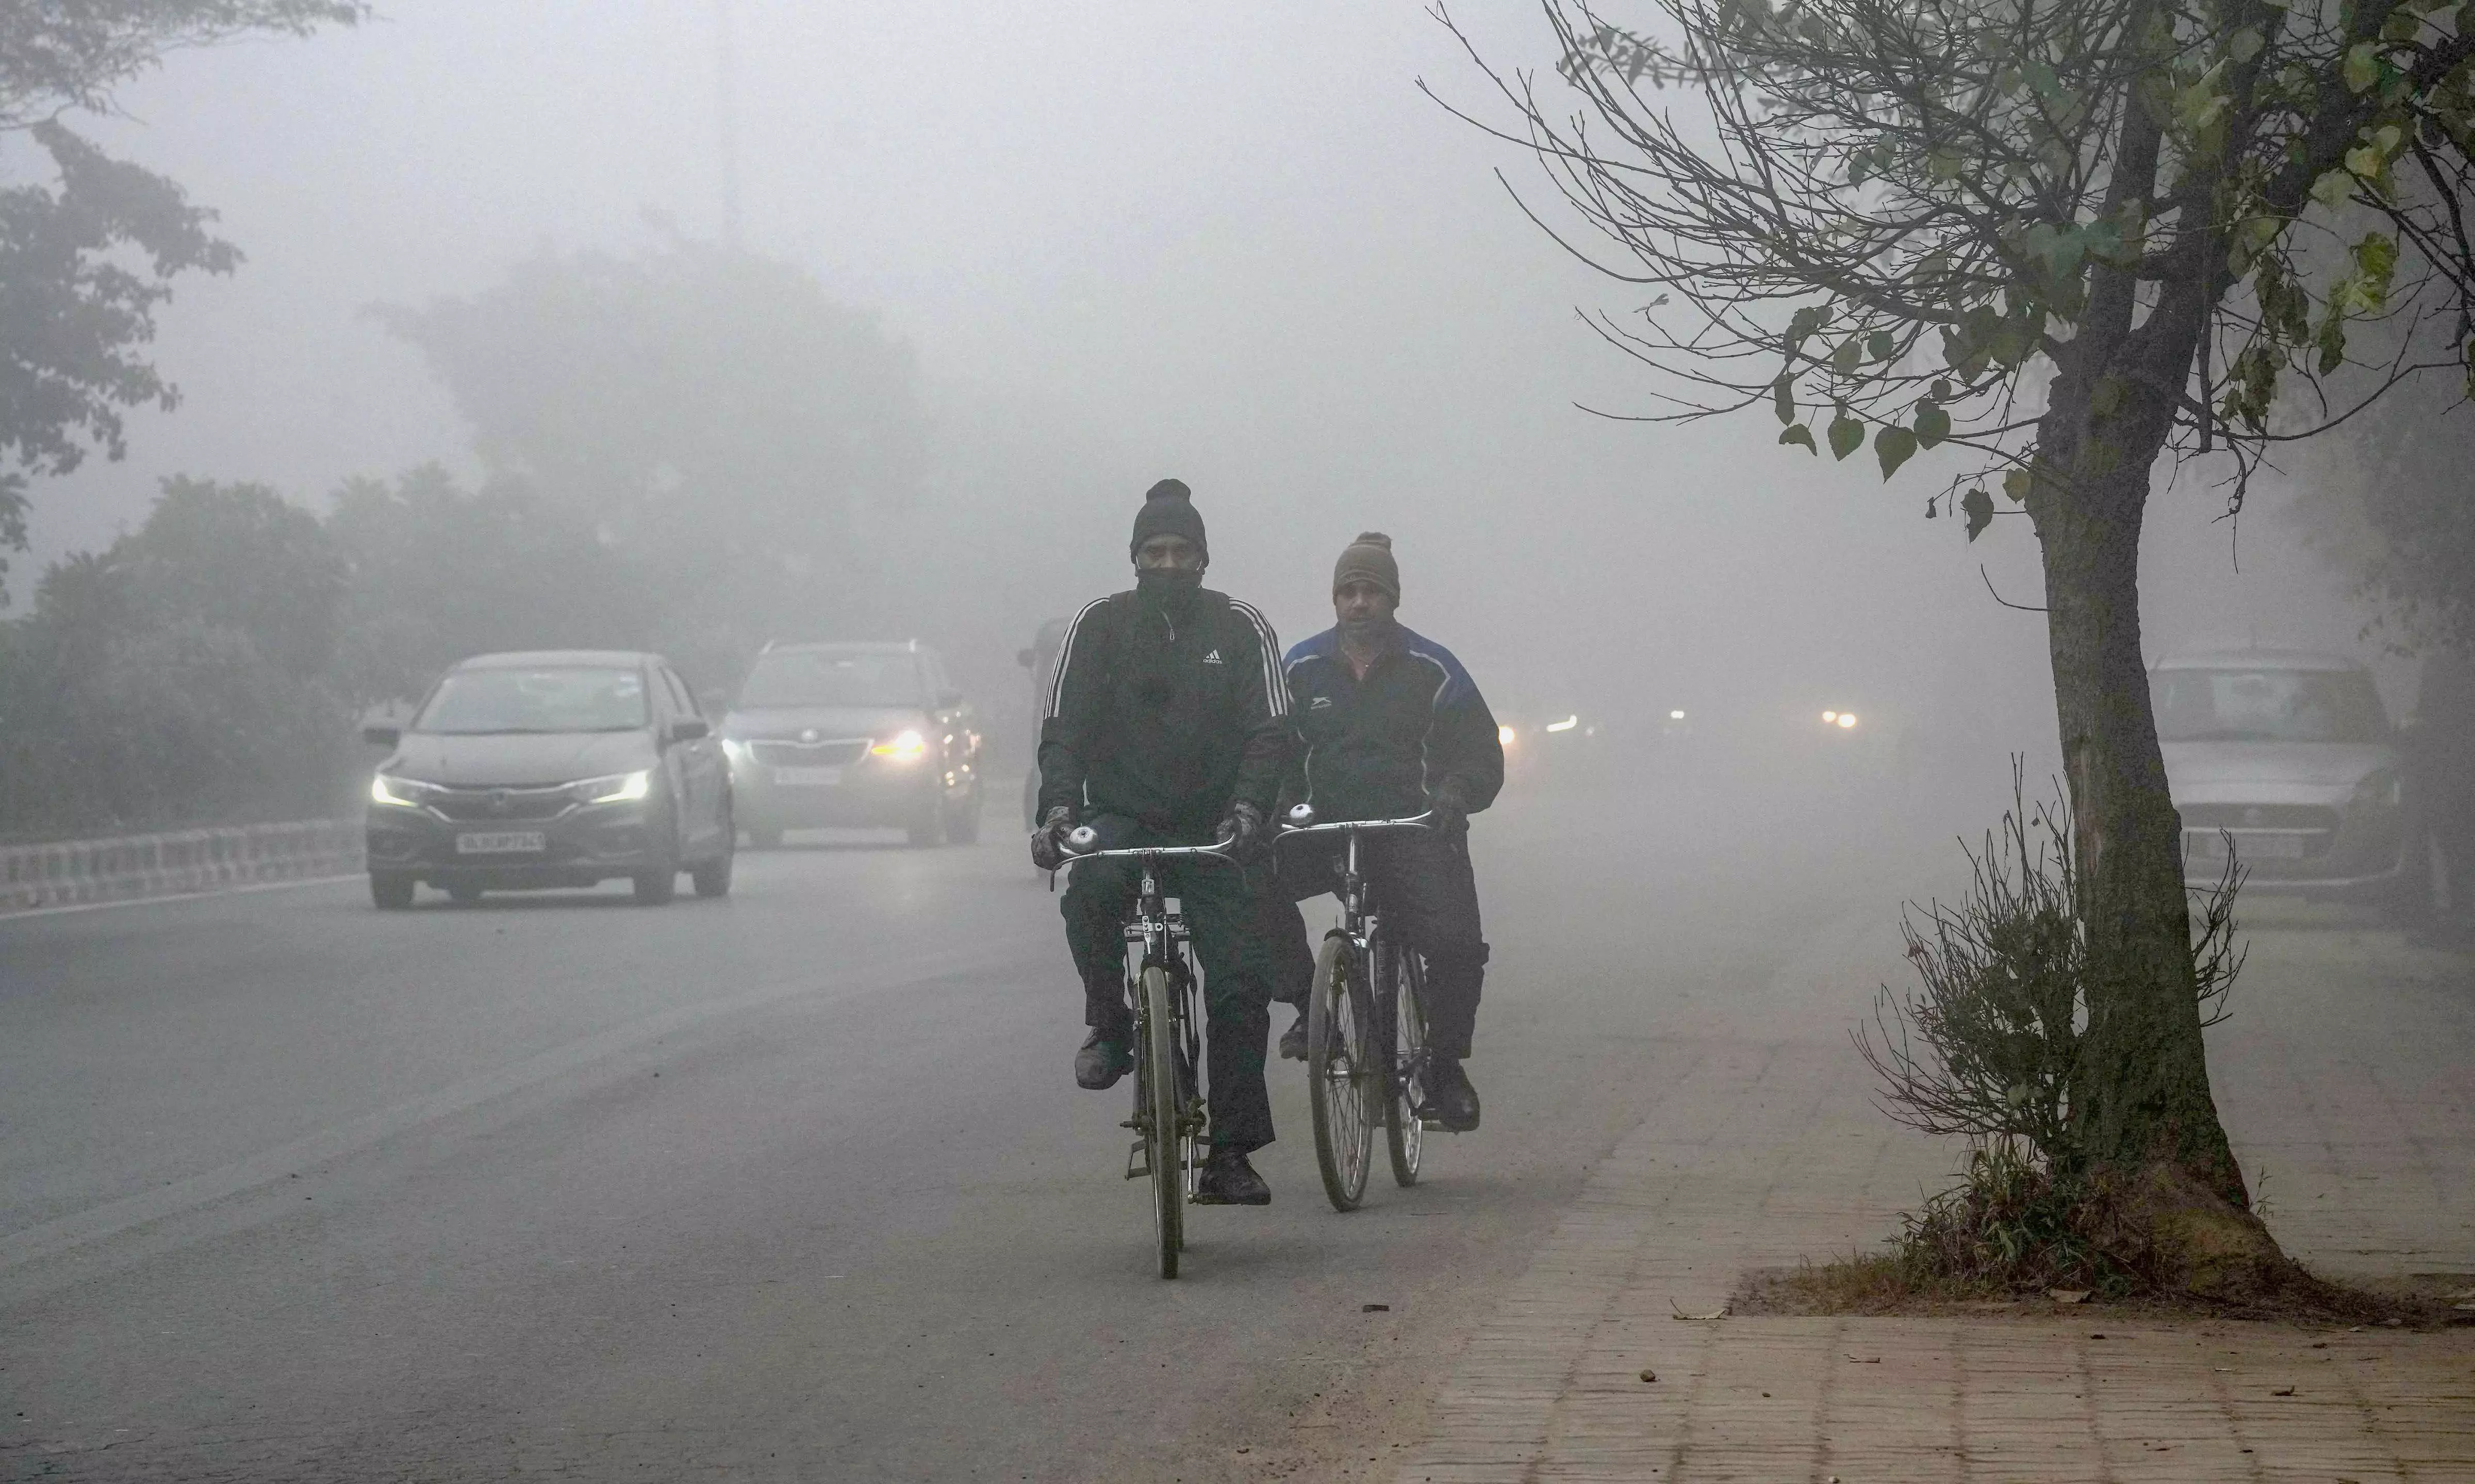 Delhi schools to commence classes from 9 am amid worsening weather